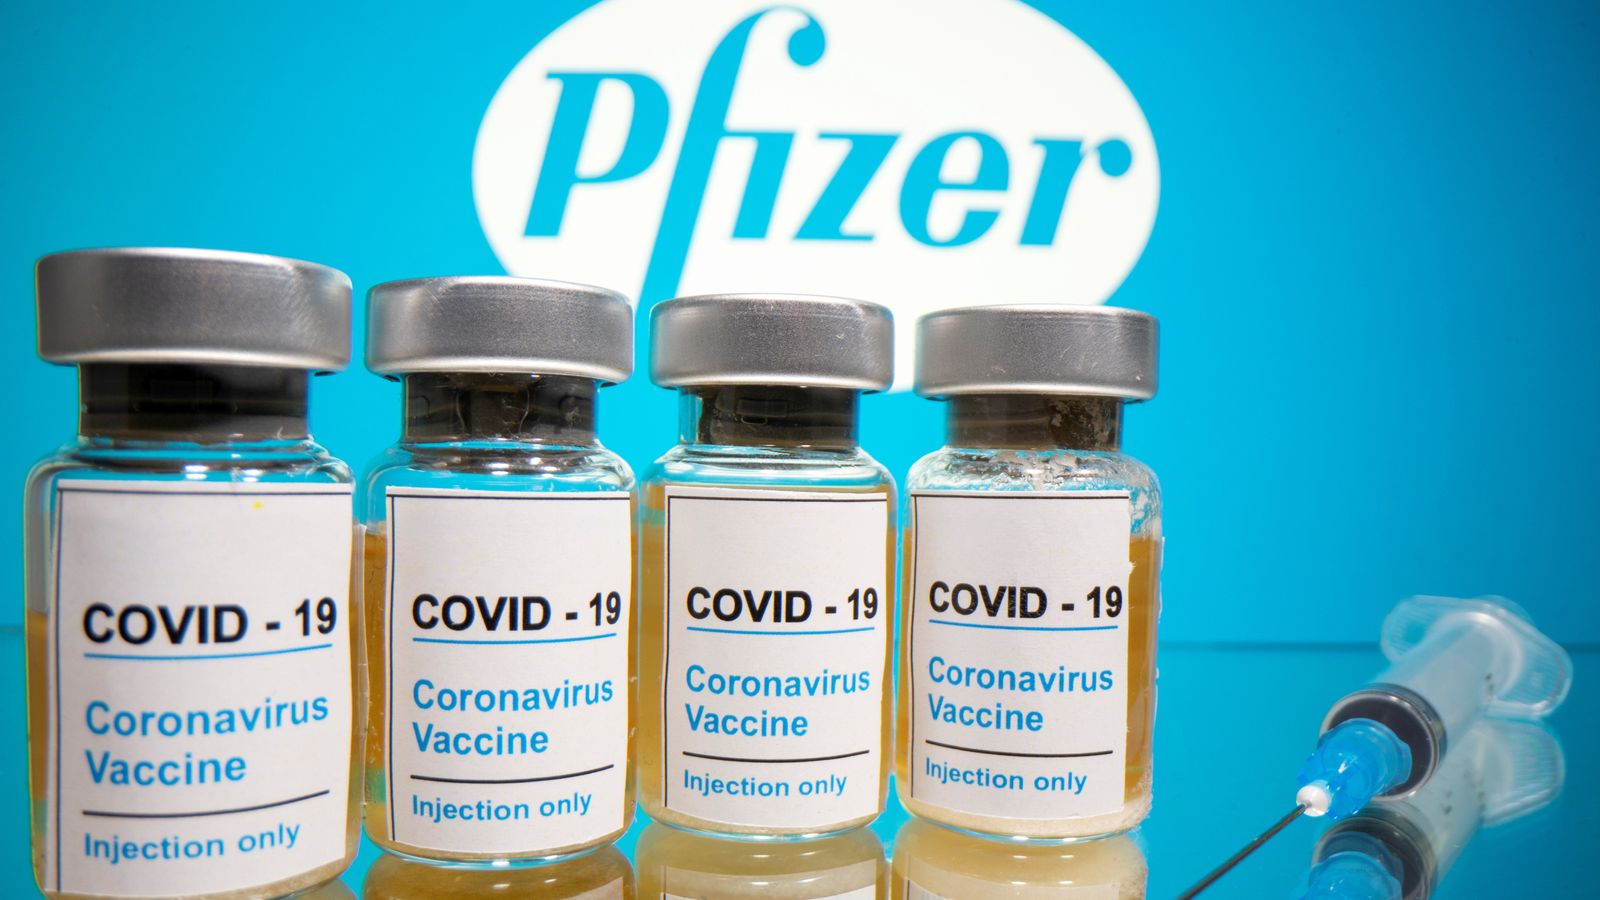 Coronavirus Pfizer Covid 19 Vaccine Found To Be 90 Effective In Great Day For Science And Humanity Uk News Sky News